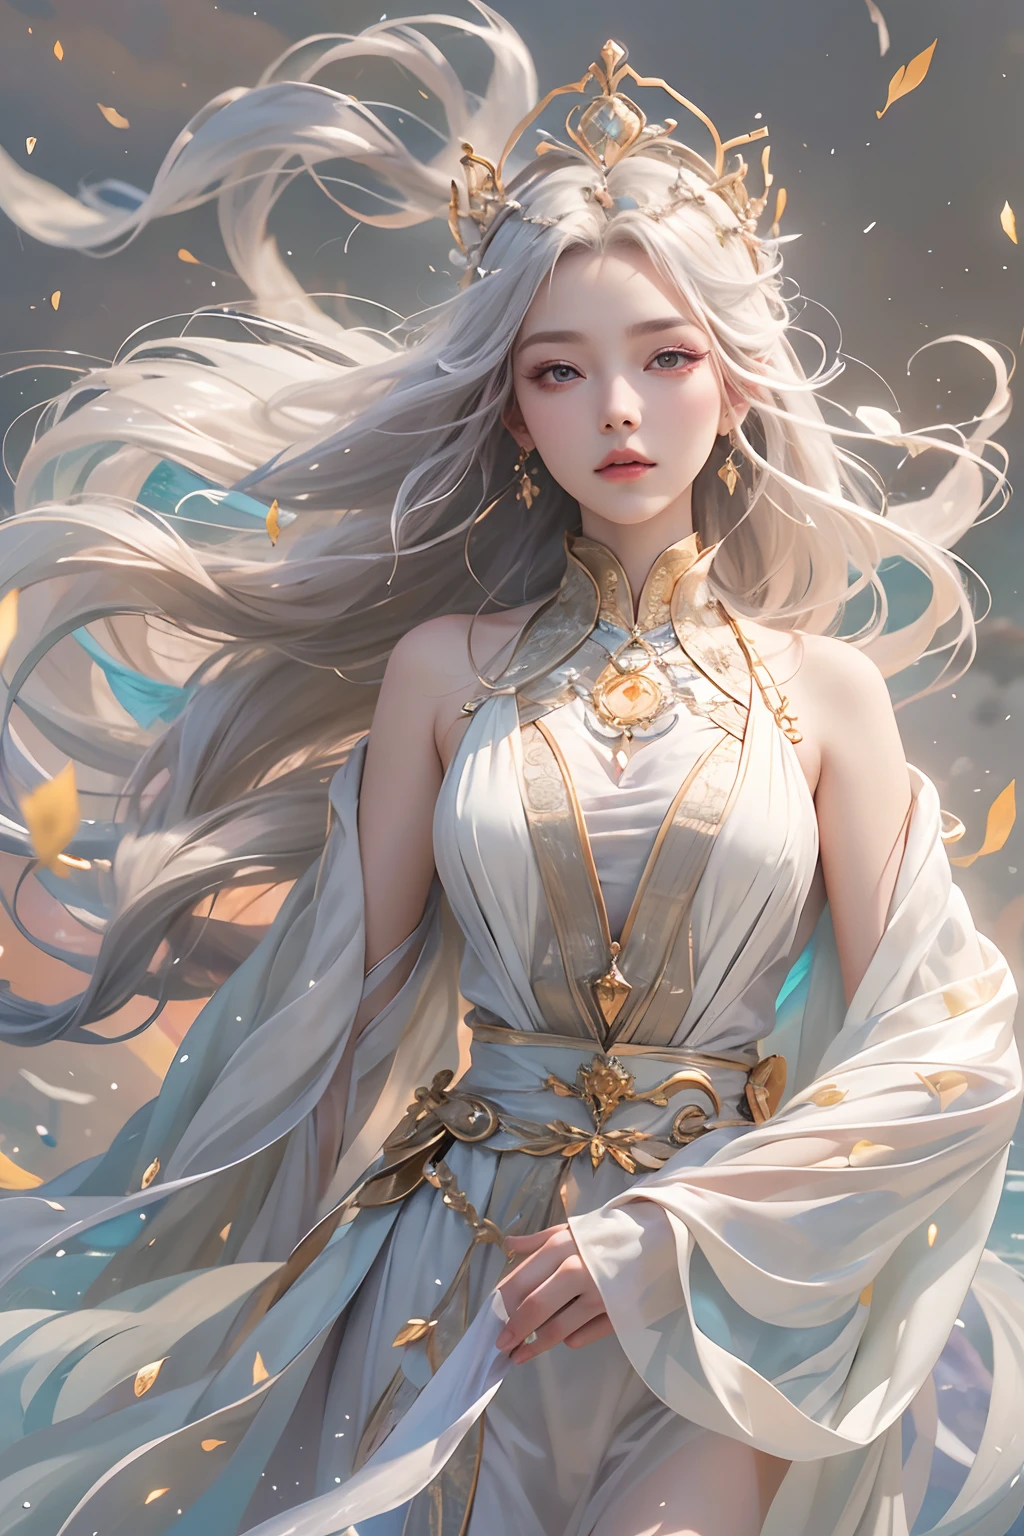 (Masterpiece, Top Quality: 1.2), Official Art, Goddess of the Wind, Long Flowing Hair in the Breeze, Levitating with Graceful Posture, Silk Garments Billowing in the Wind, Eyes (Aeolian Serenity: 1.3), Crown Adorned with Whirling Gusts, (Ethereal White Hues: 1.1), (Air Magic, Airbending: 1.4), Fantasy Art.